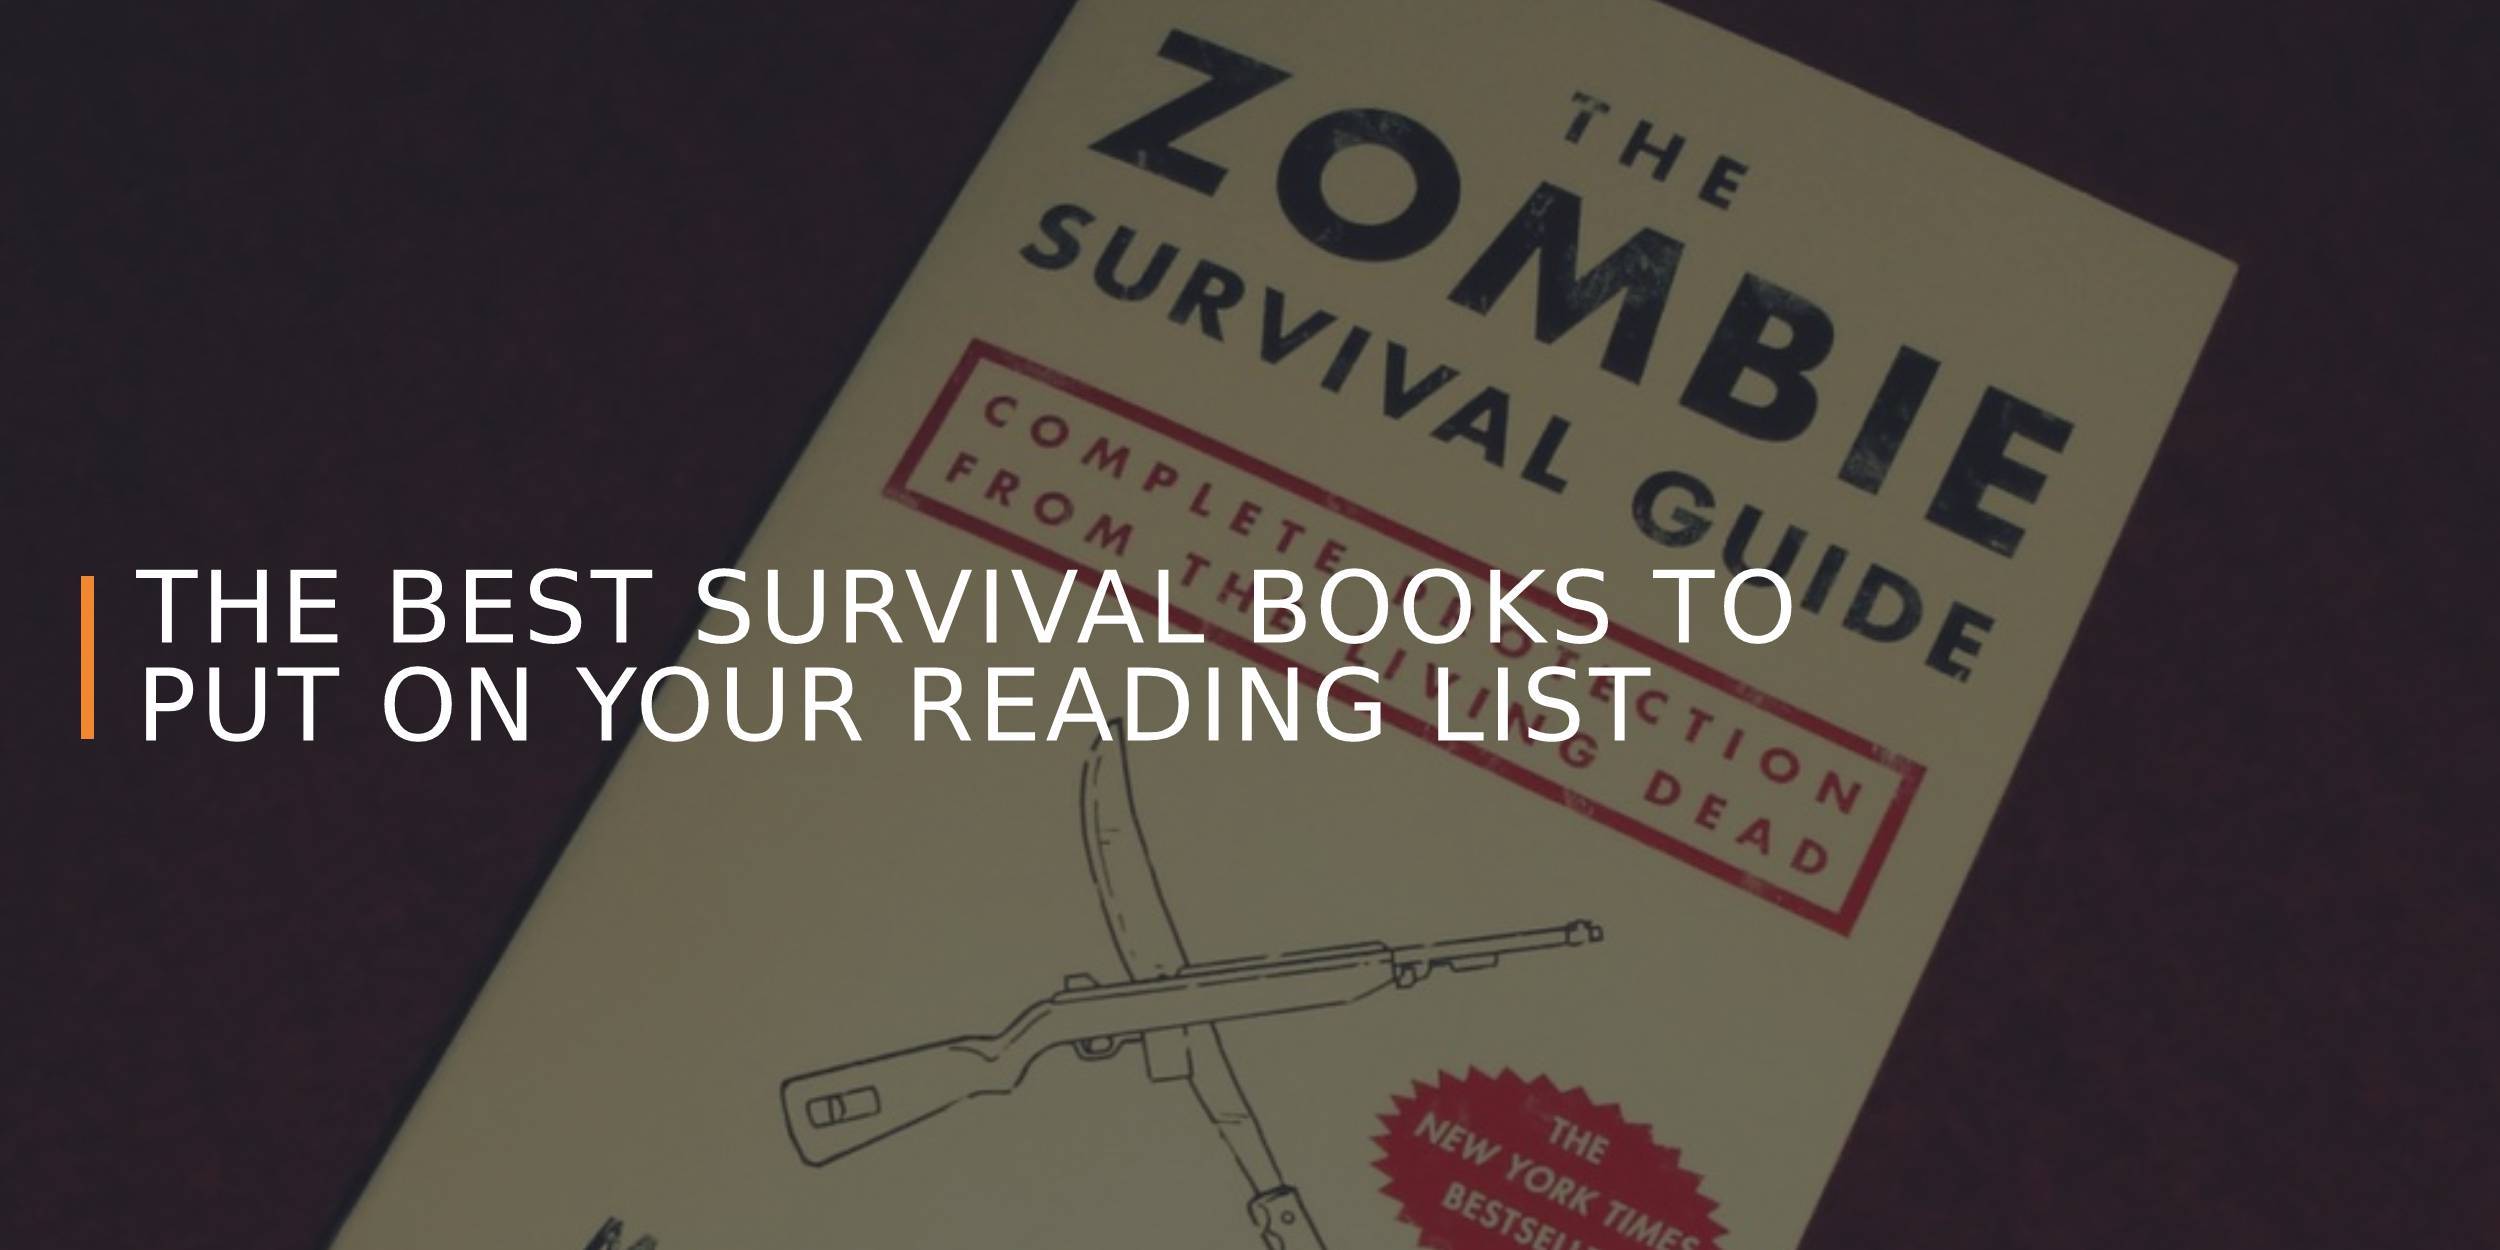 The Best Survival Books to Put on Your Reading List